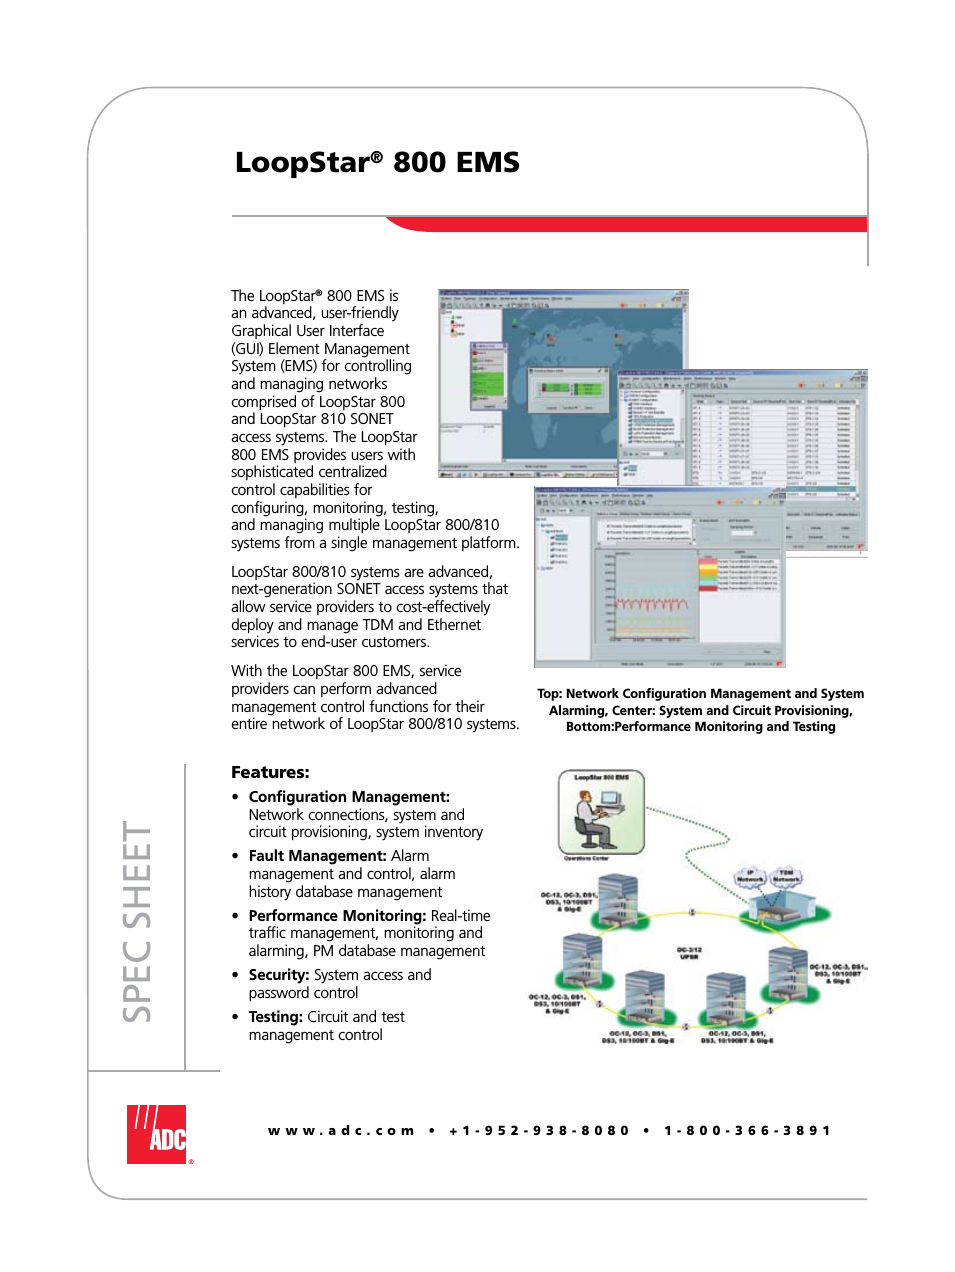 LoopStar 800 EMS (Page 1)